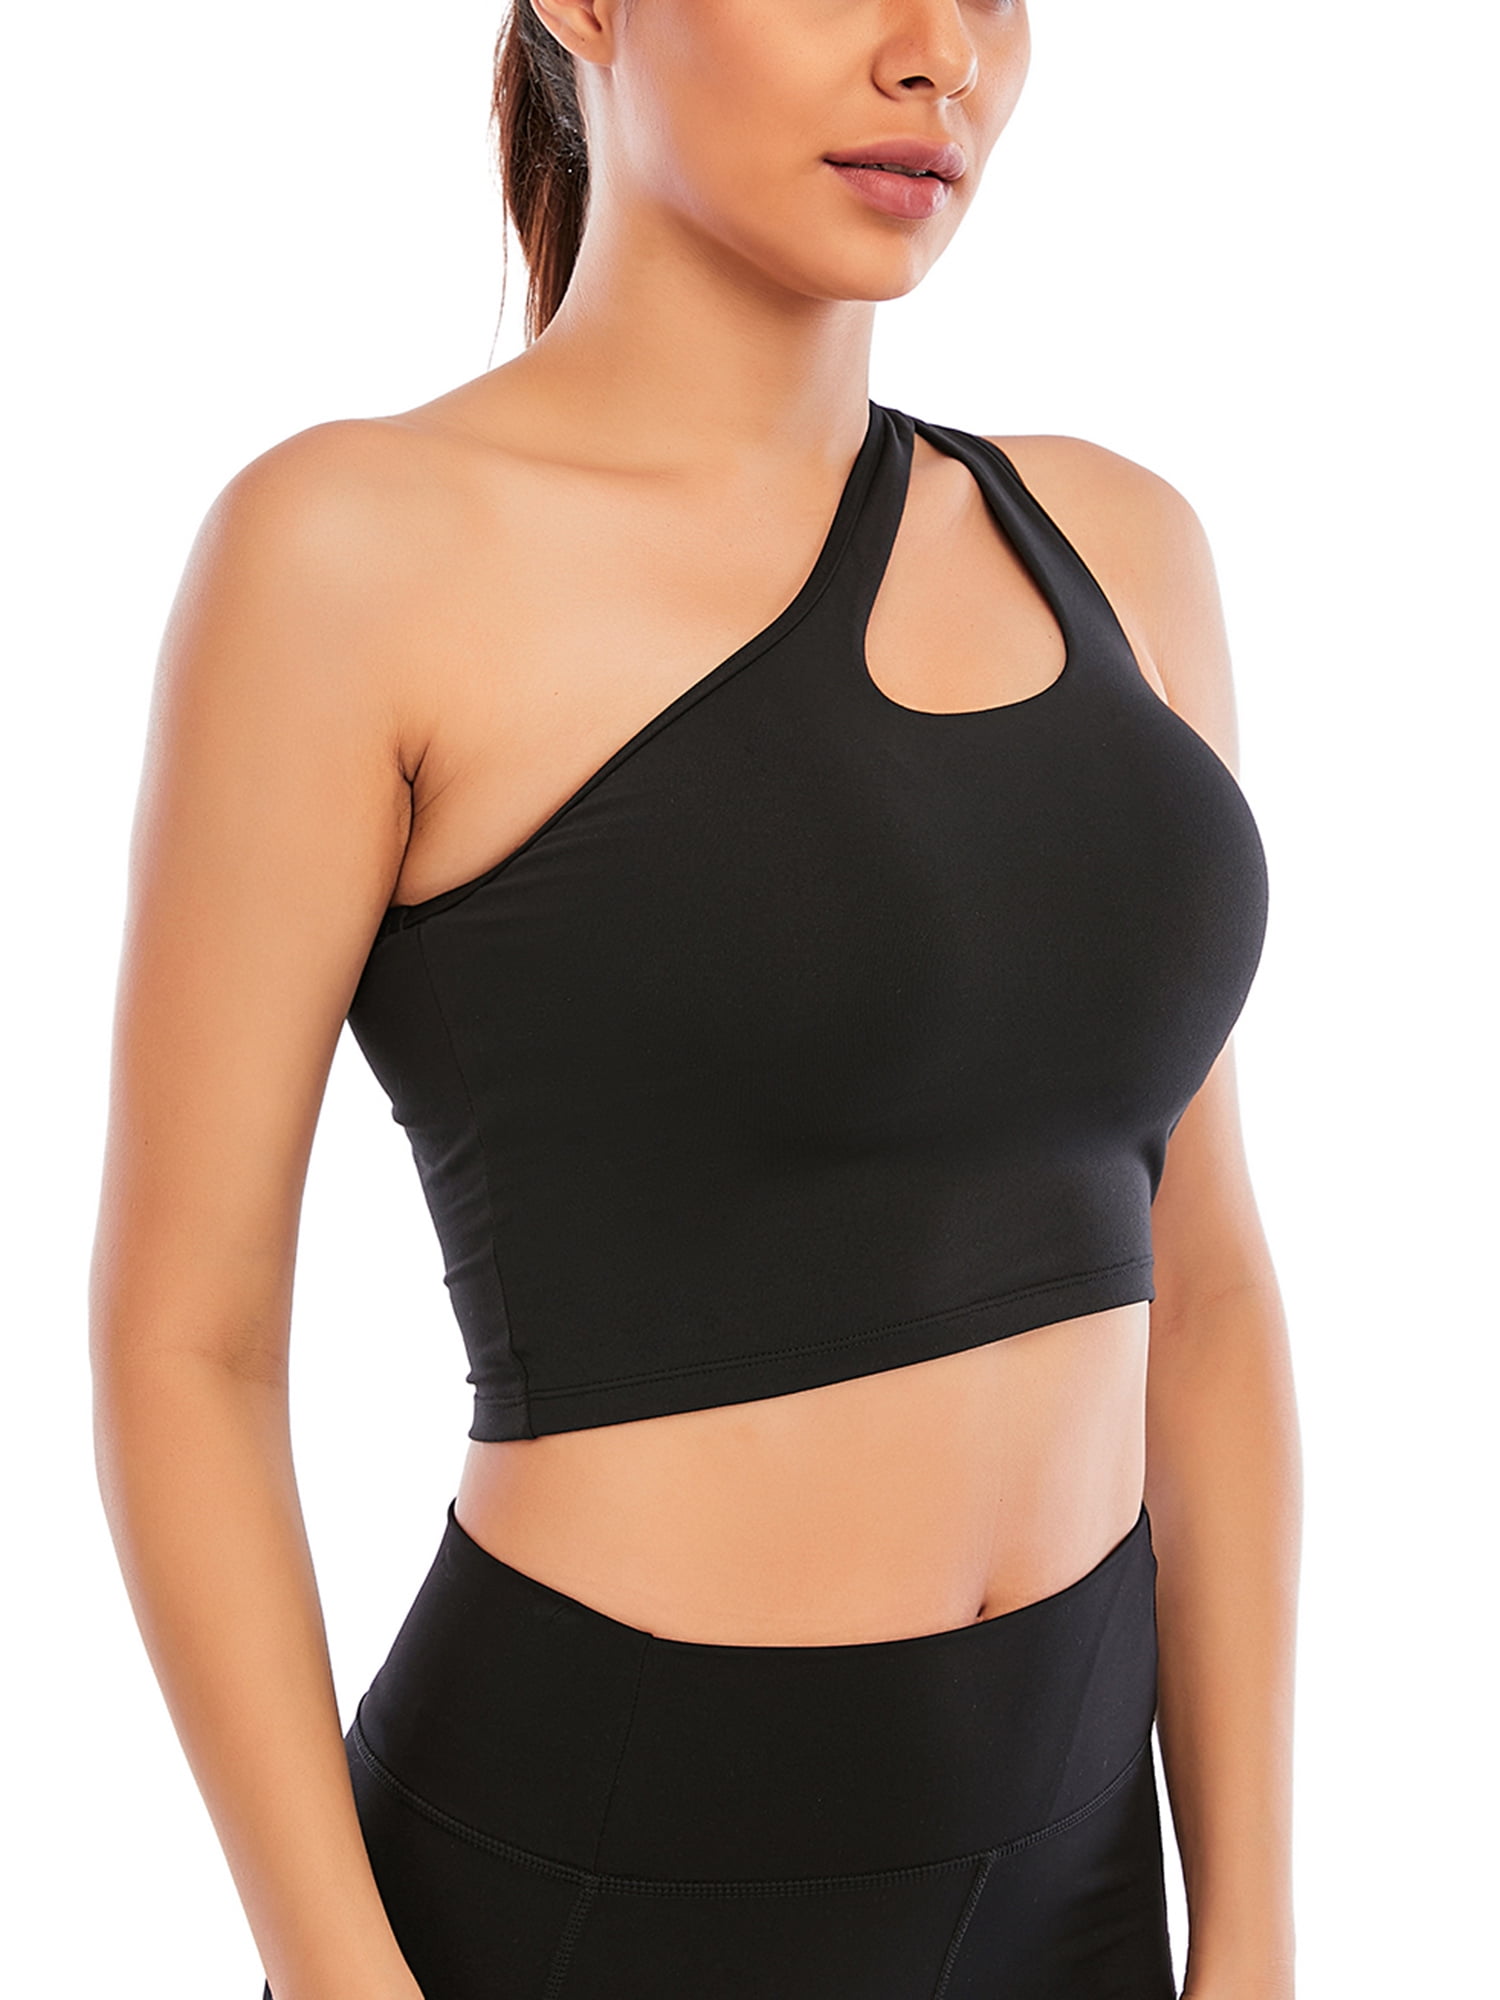 FANNYC Women's One Shoulder Sports Bras Removable Pads One Strap Crop Yoga  Top Wirefree Sexy Cute Medium Support Sports Bra For Running Active Gym